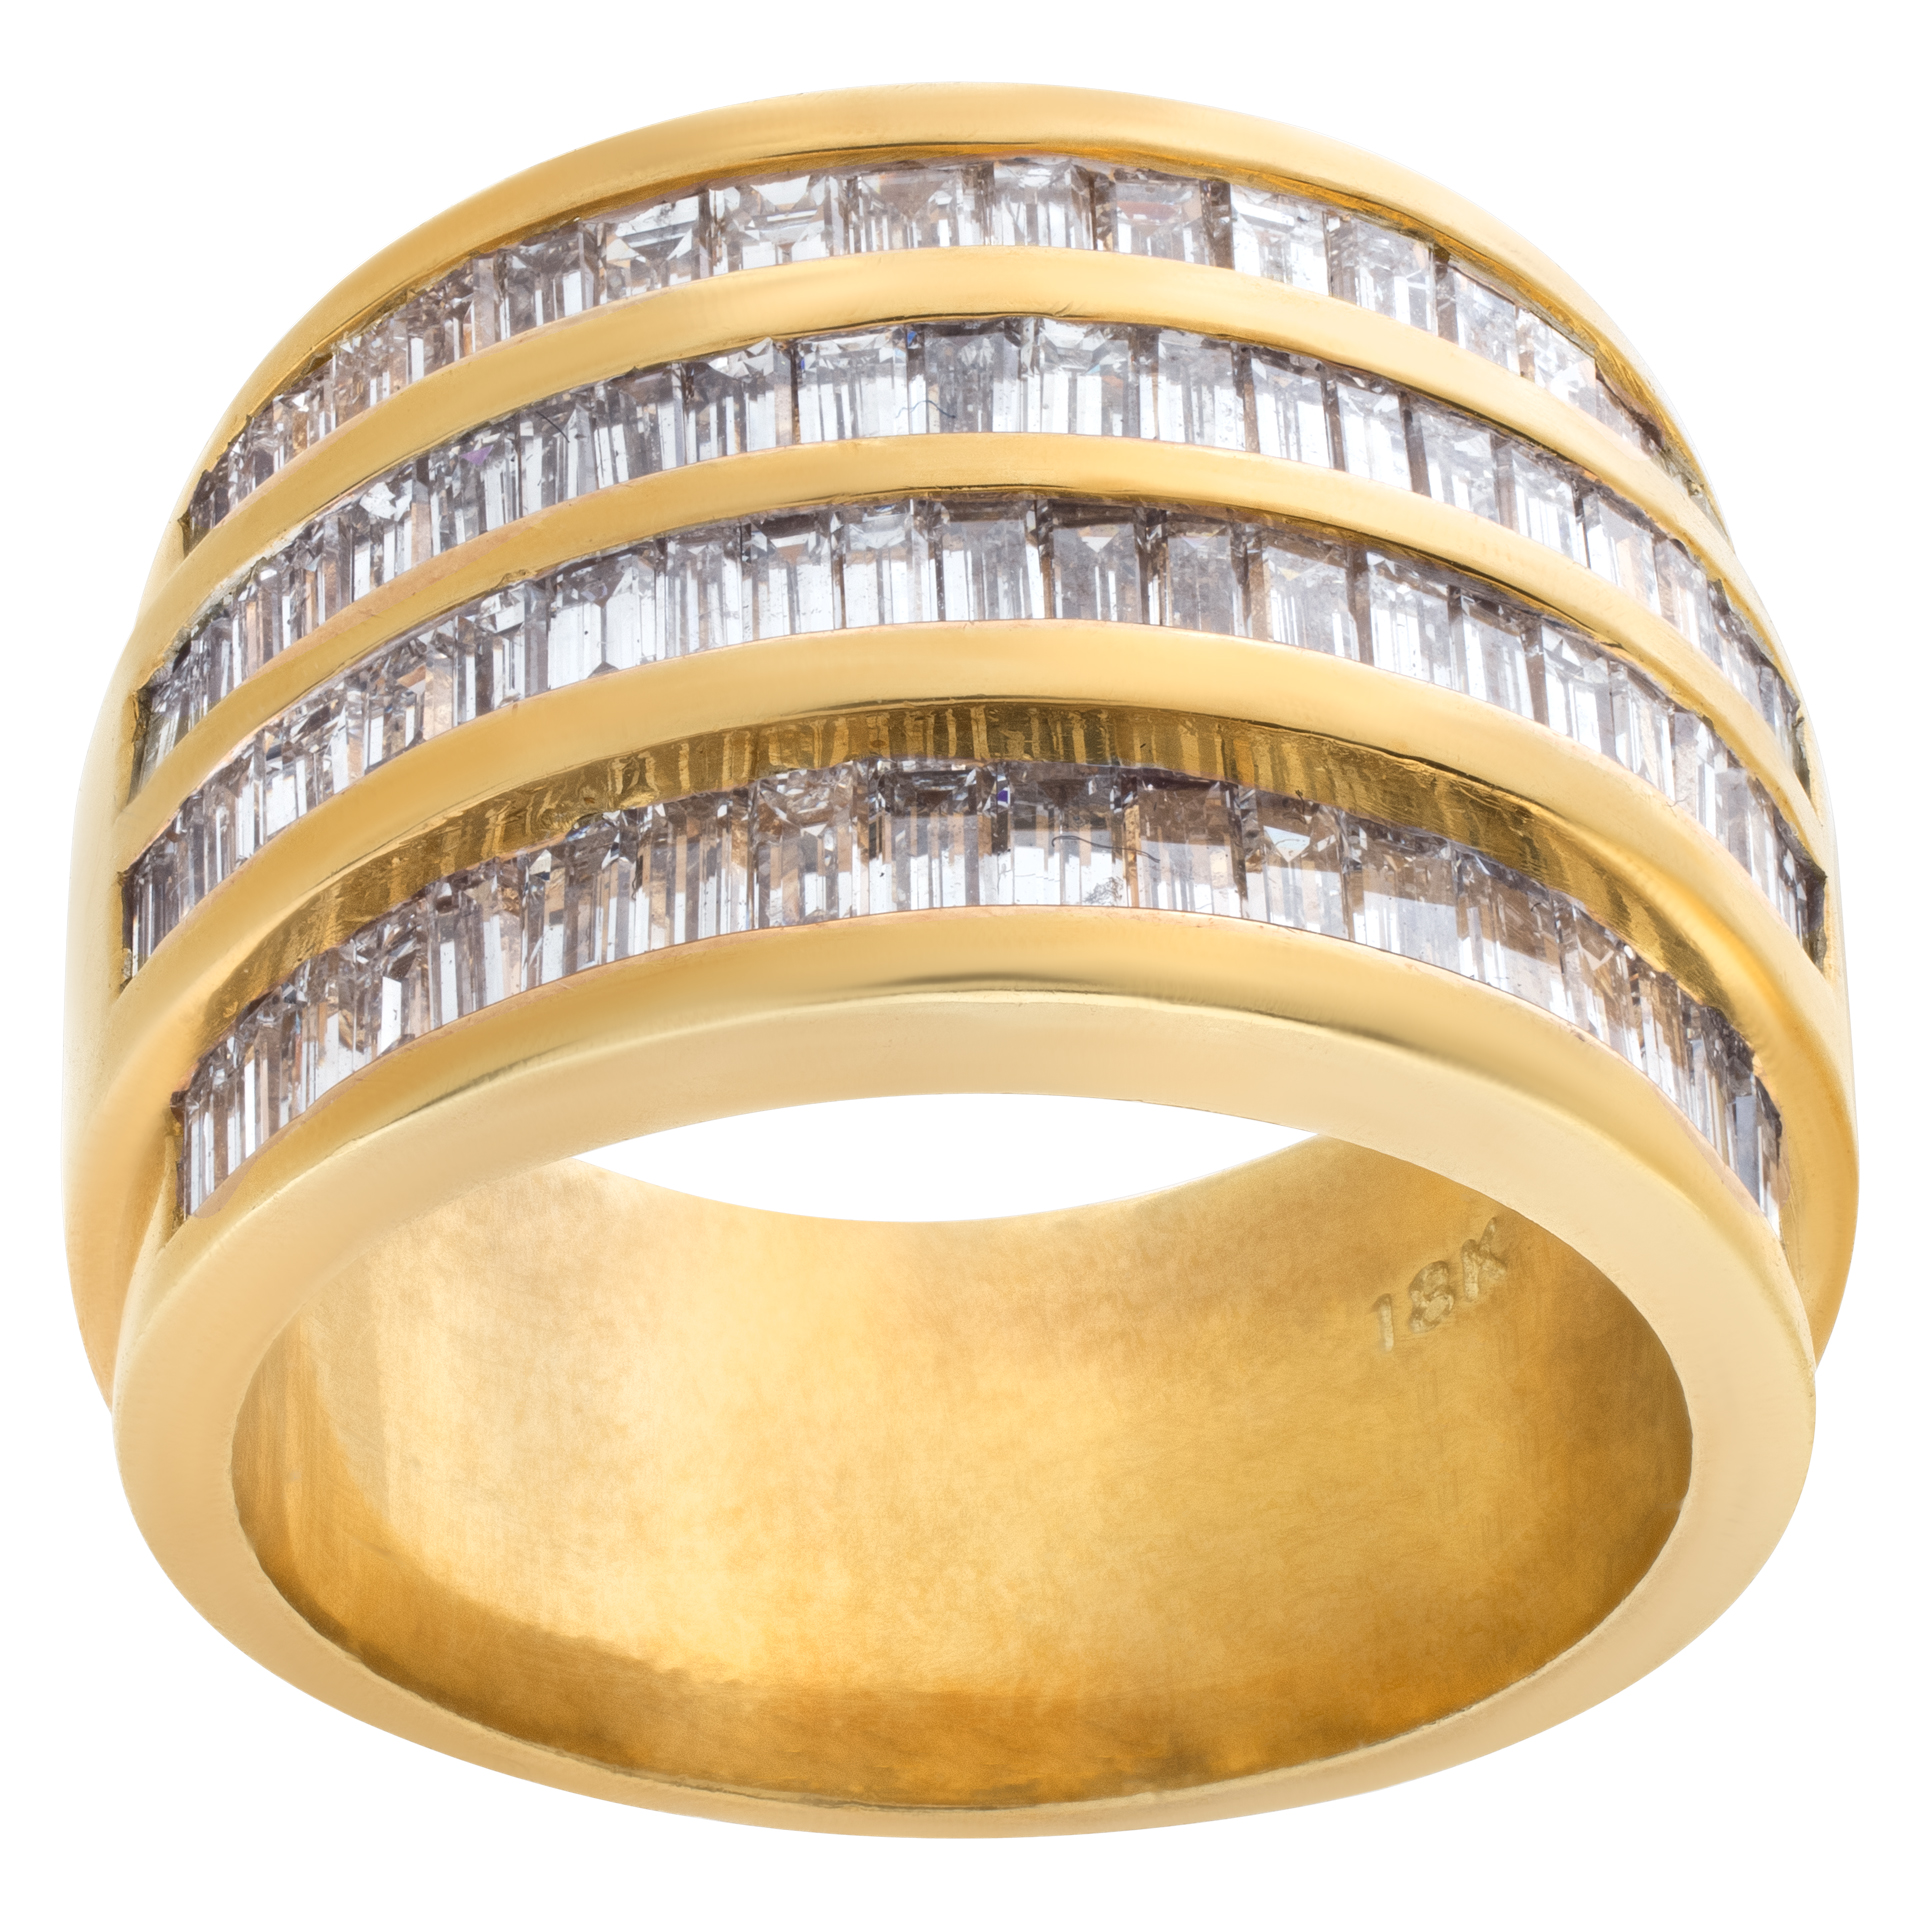 4 rows baguette cut diamond ring set in 18k yellow gold